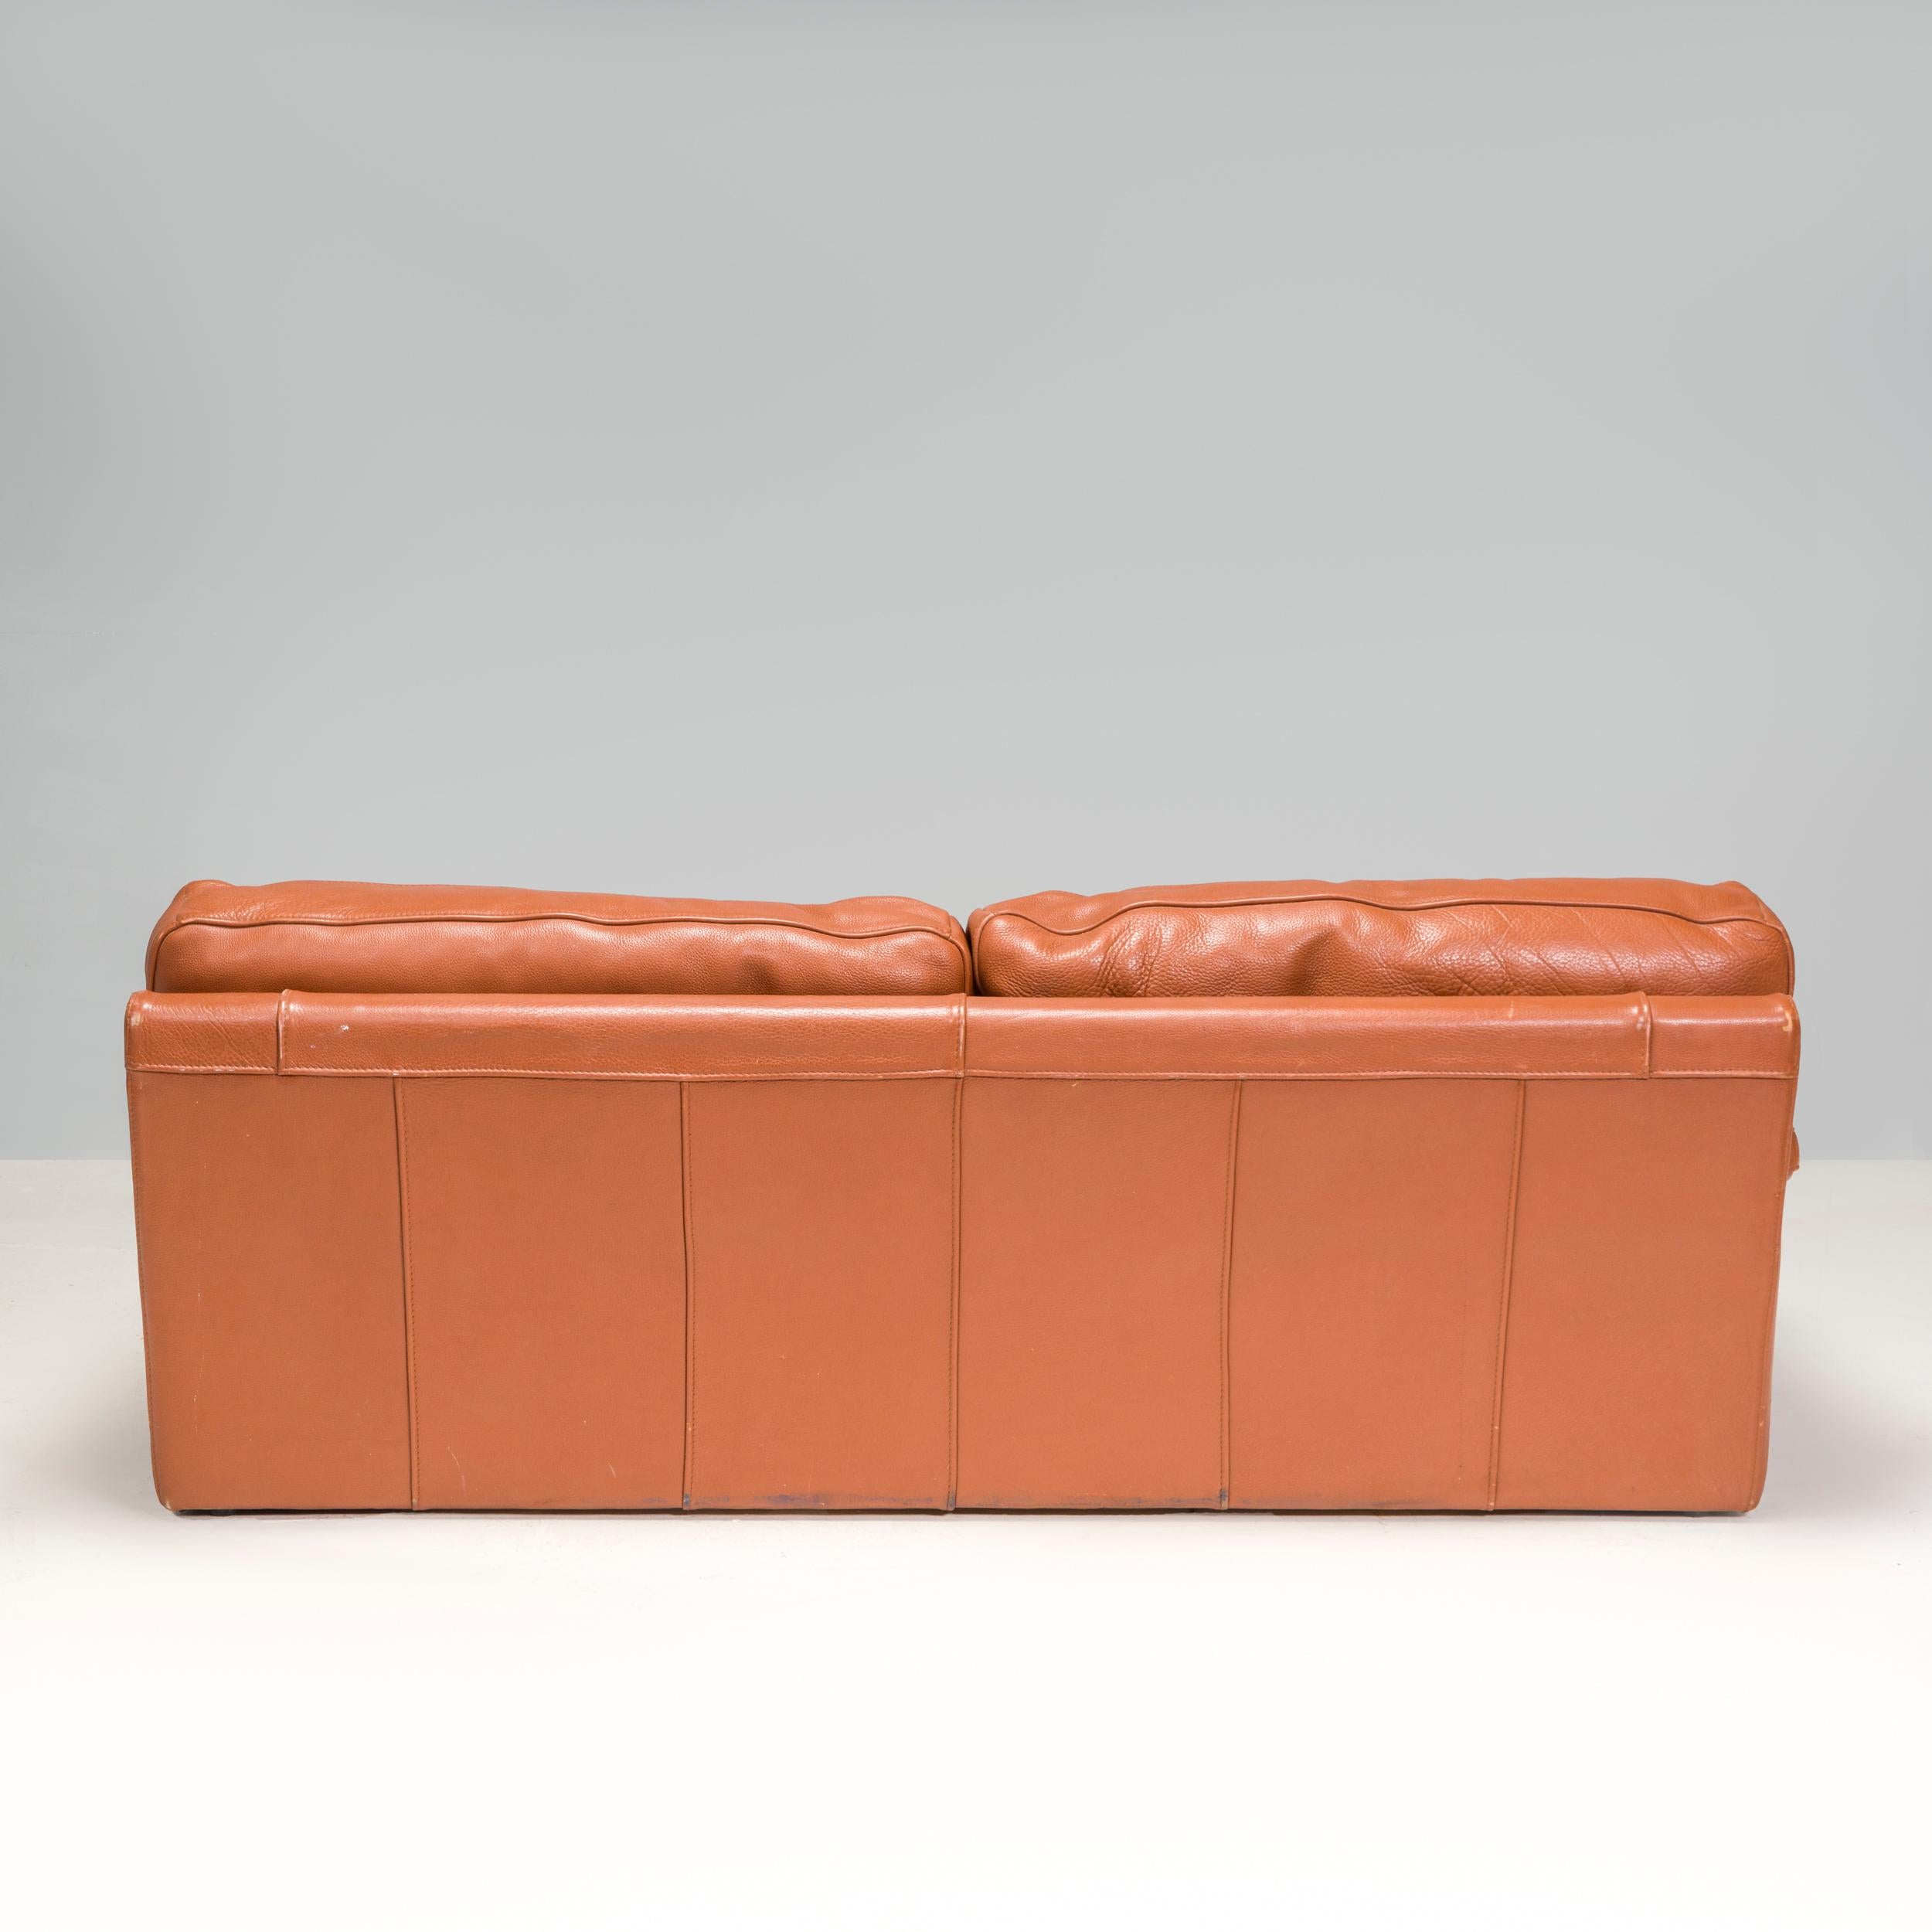 Late 20th Century Roche Bobois Brown Leather Sofa, Three Seater For Sale